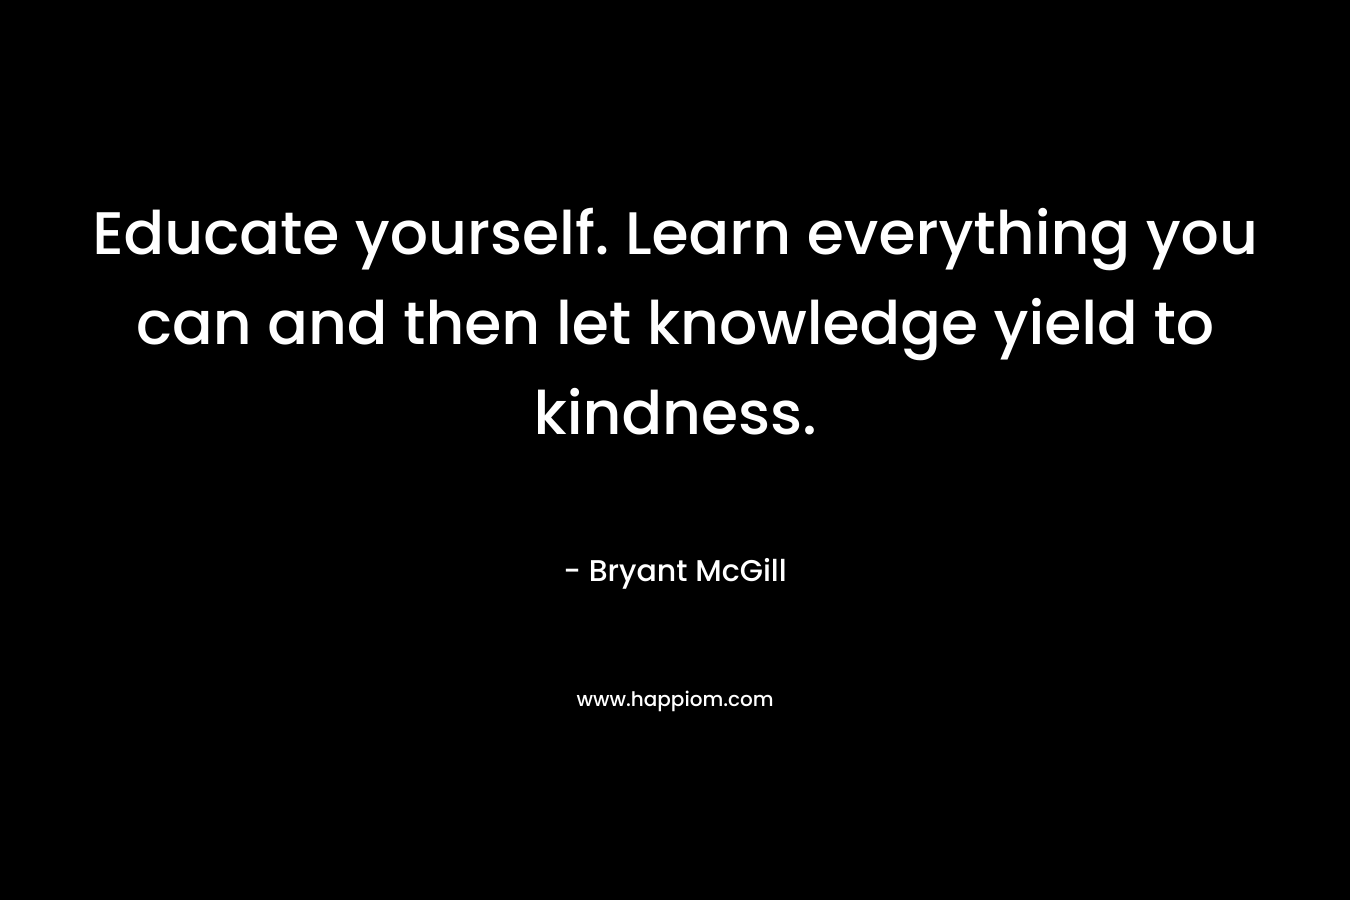 Educate yourself. Learn everything you can and then let knowledge yield to kindness.